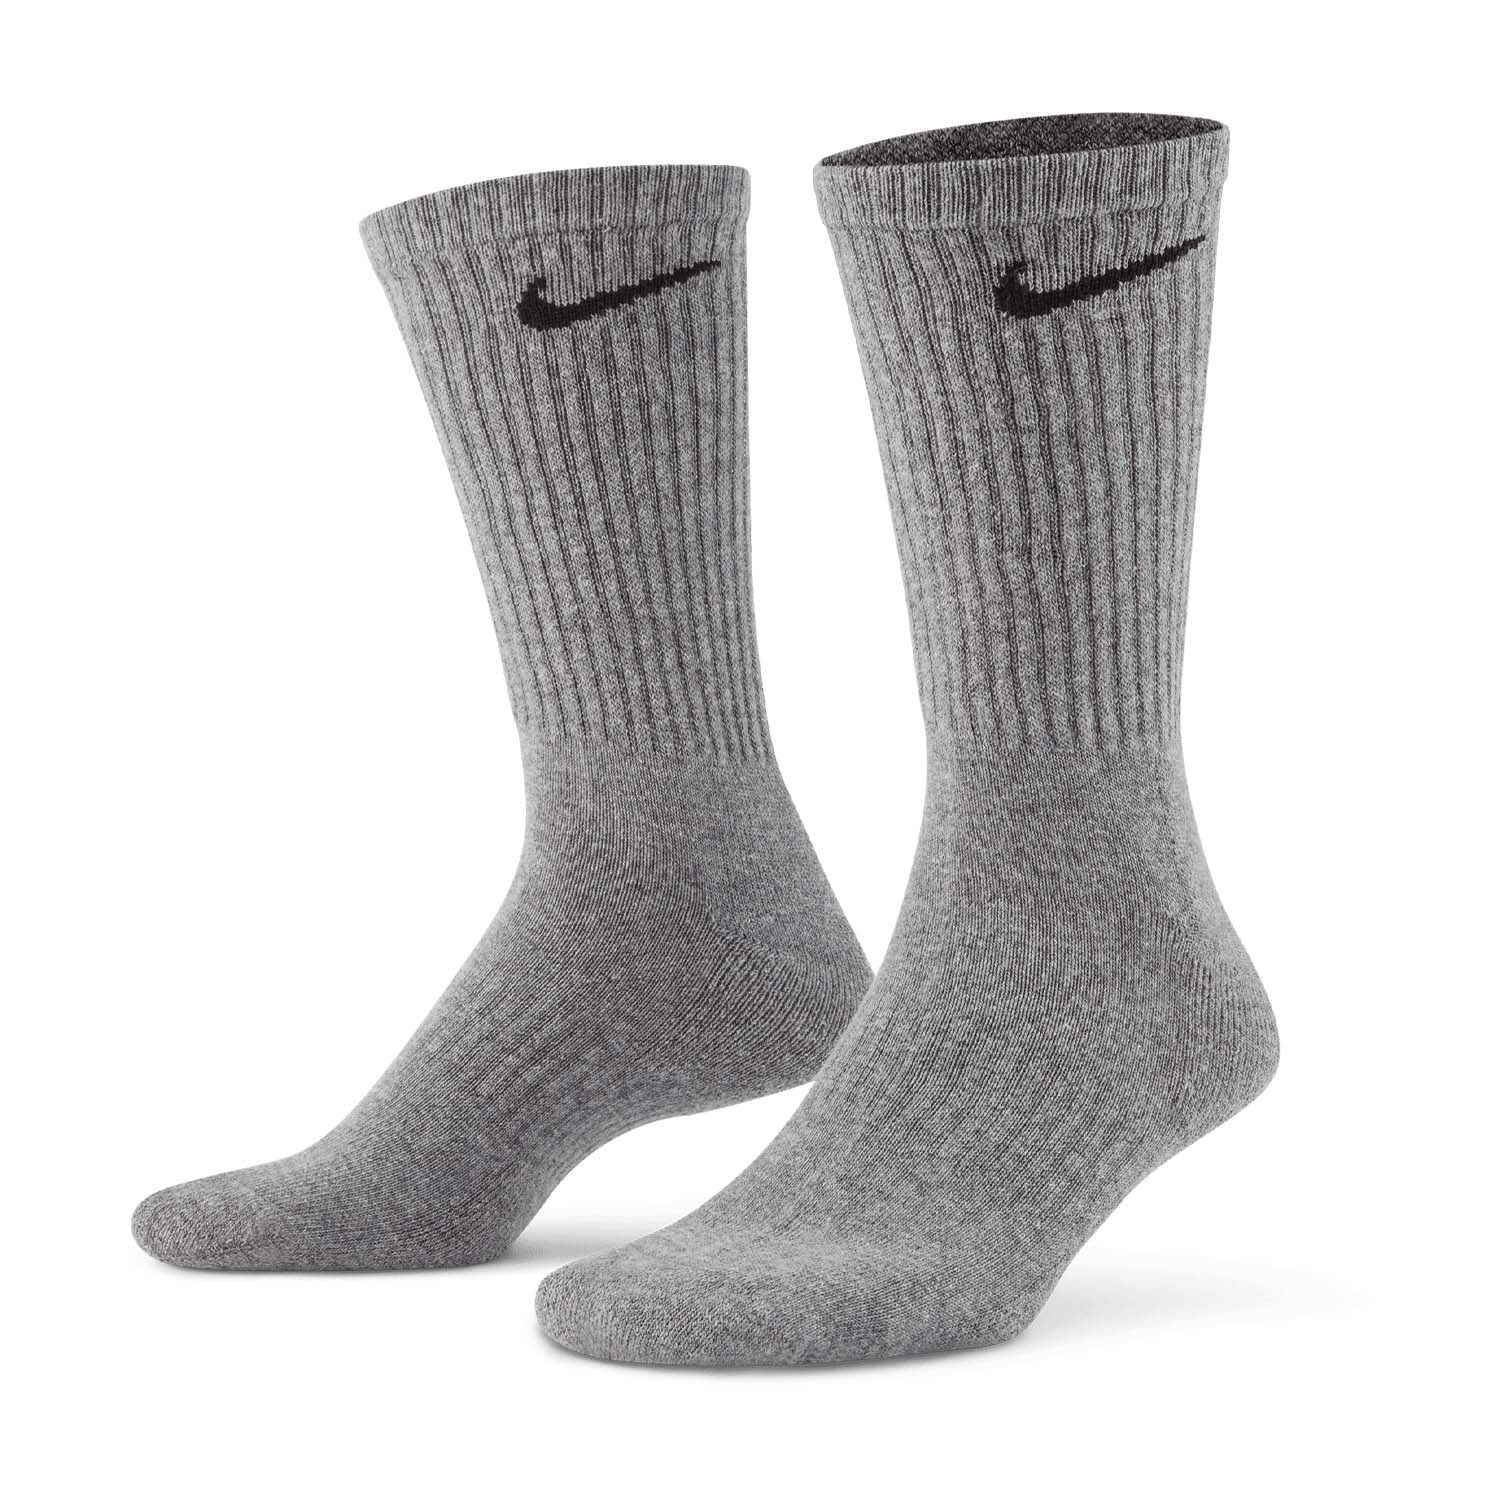 Nike Everyday Cushioned Crew x 3 Calcetines - Carbon Heather/Black